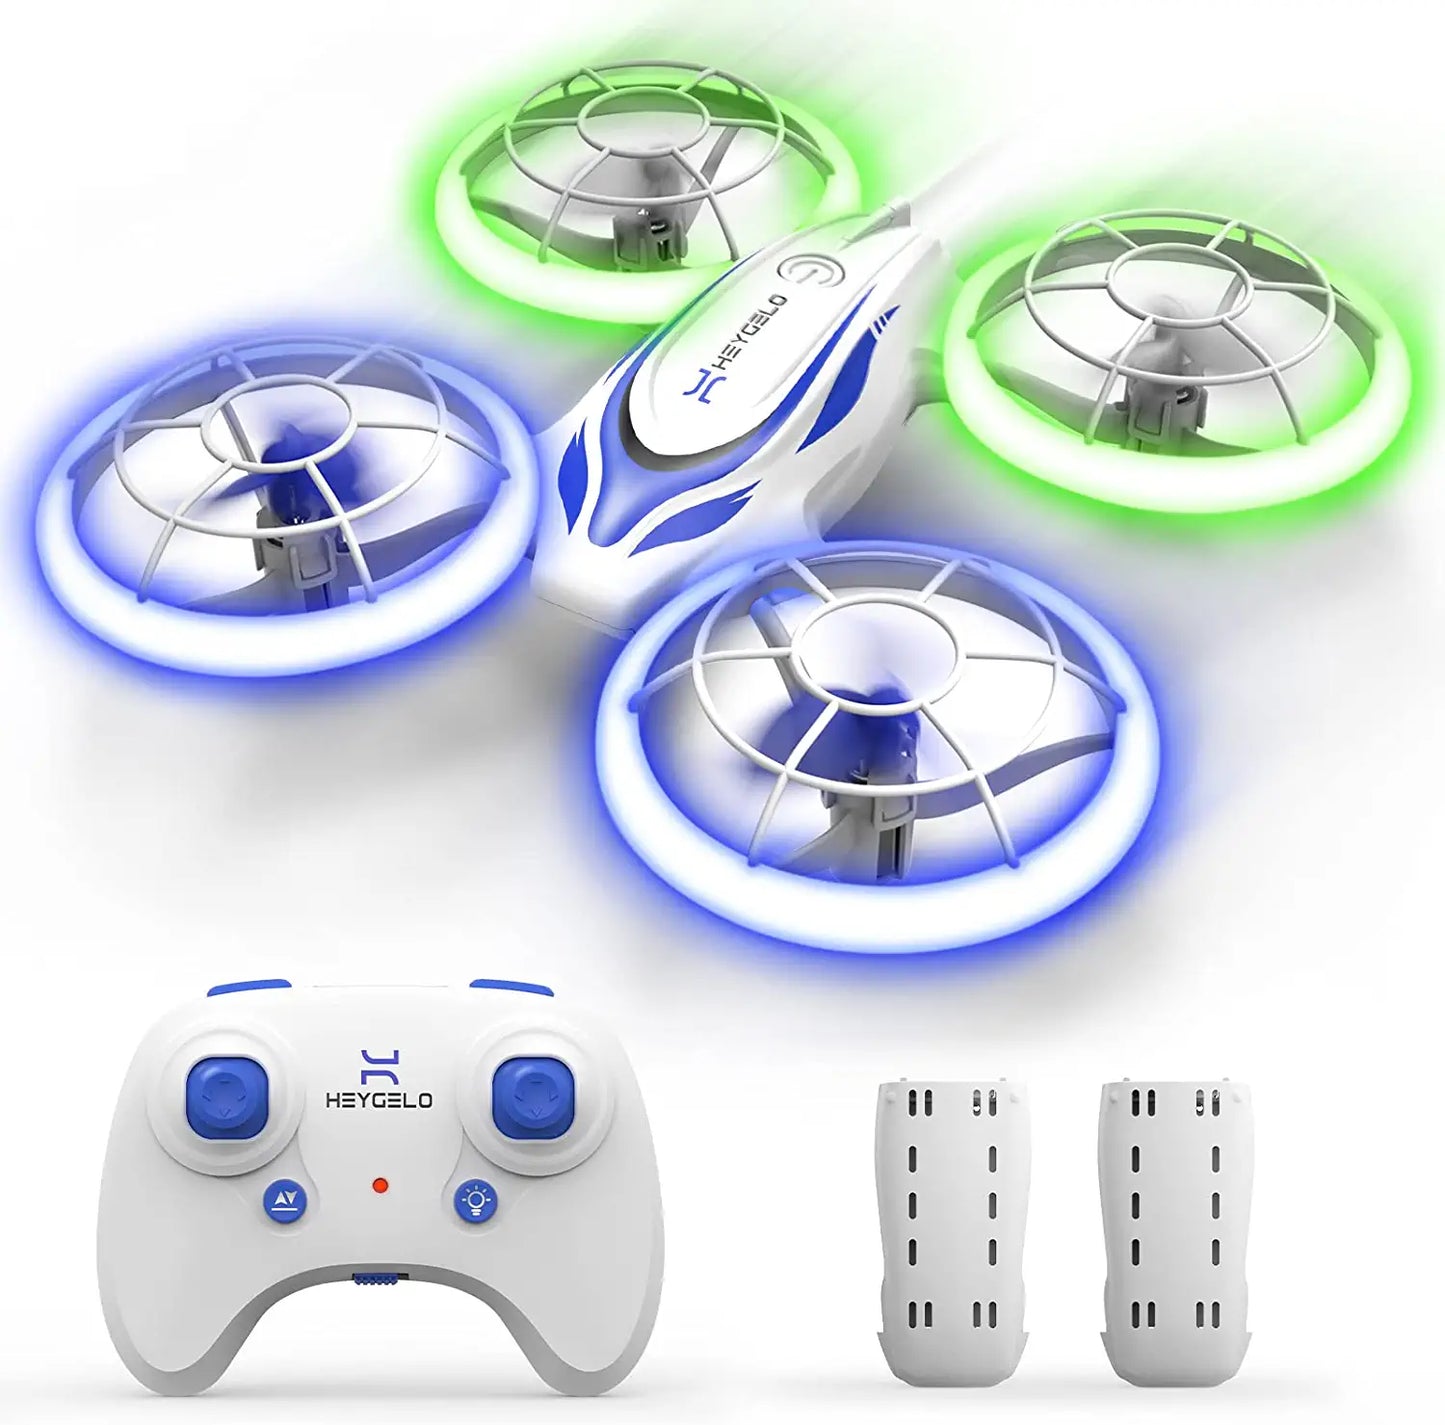 Heygelo S60 Drones for Kids - Mini Drone with LED Lights for Beginners, RC Quadcopter with Altitude Hold and Headless Mode, Full Propeller Protect, 3D Flips, 2 Batteries, Toys Gifts for Boys Girls - RCDrone